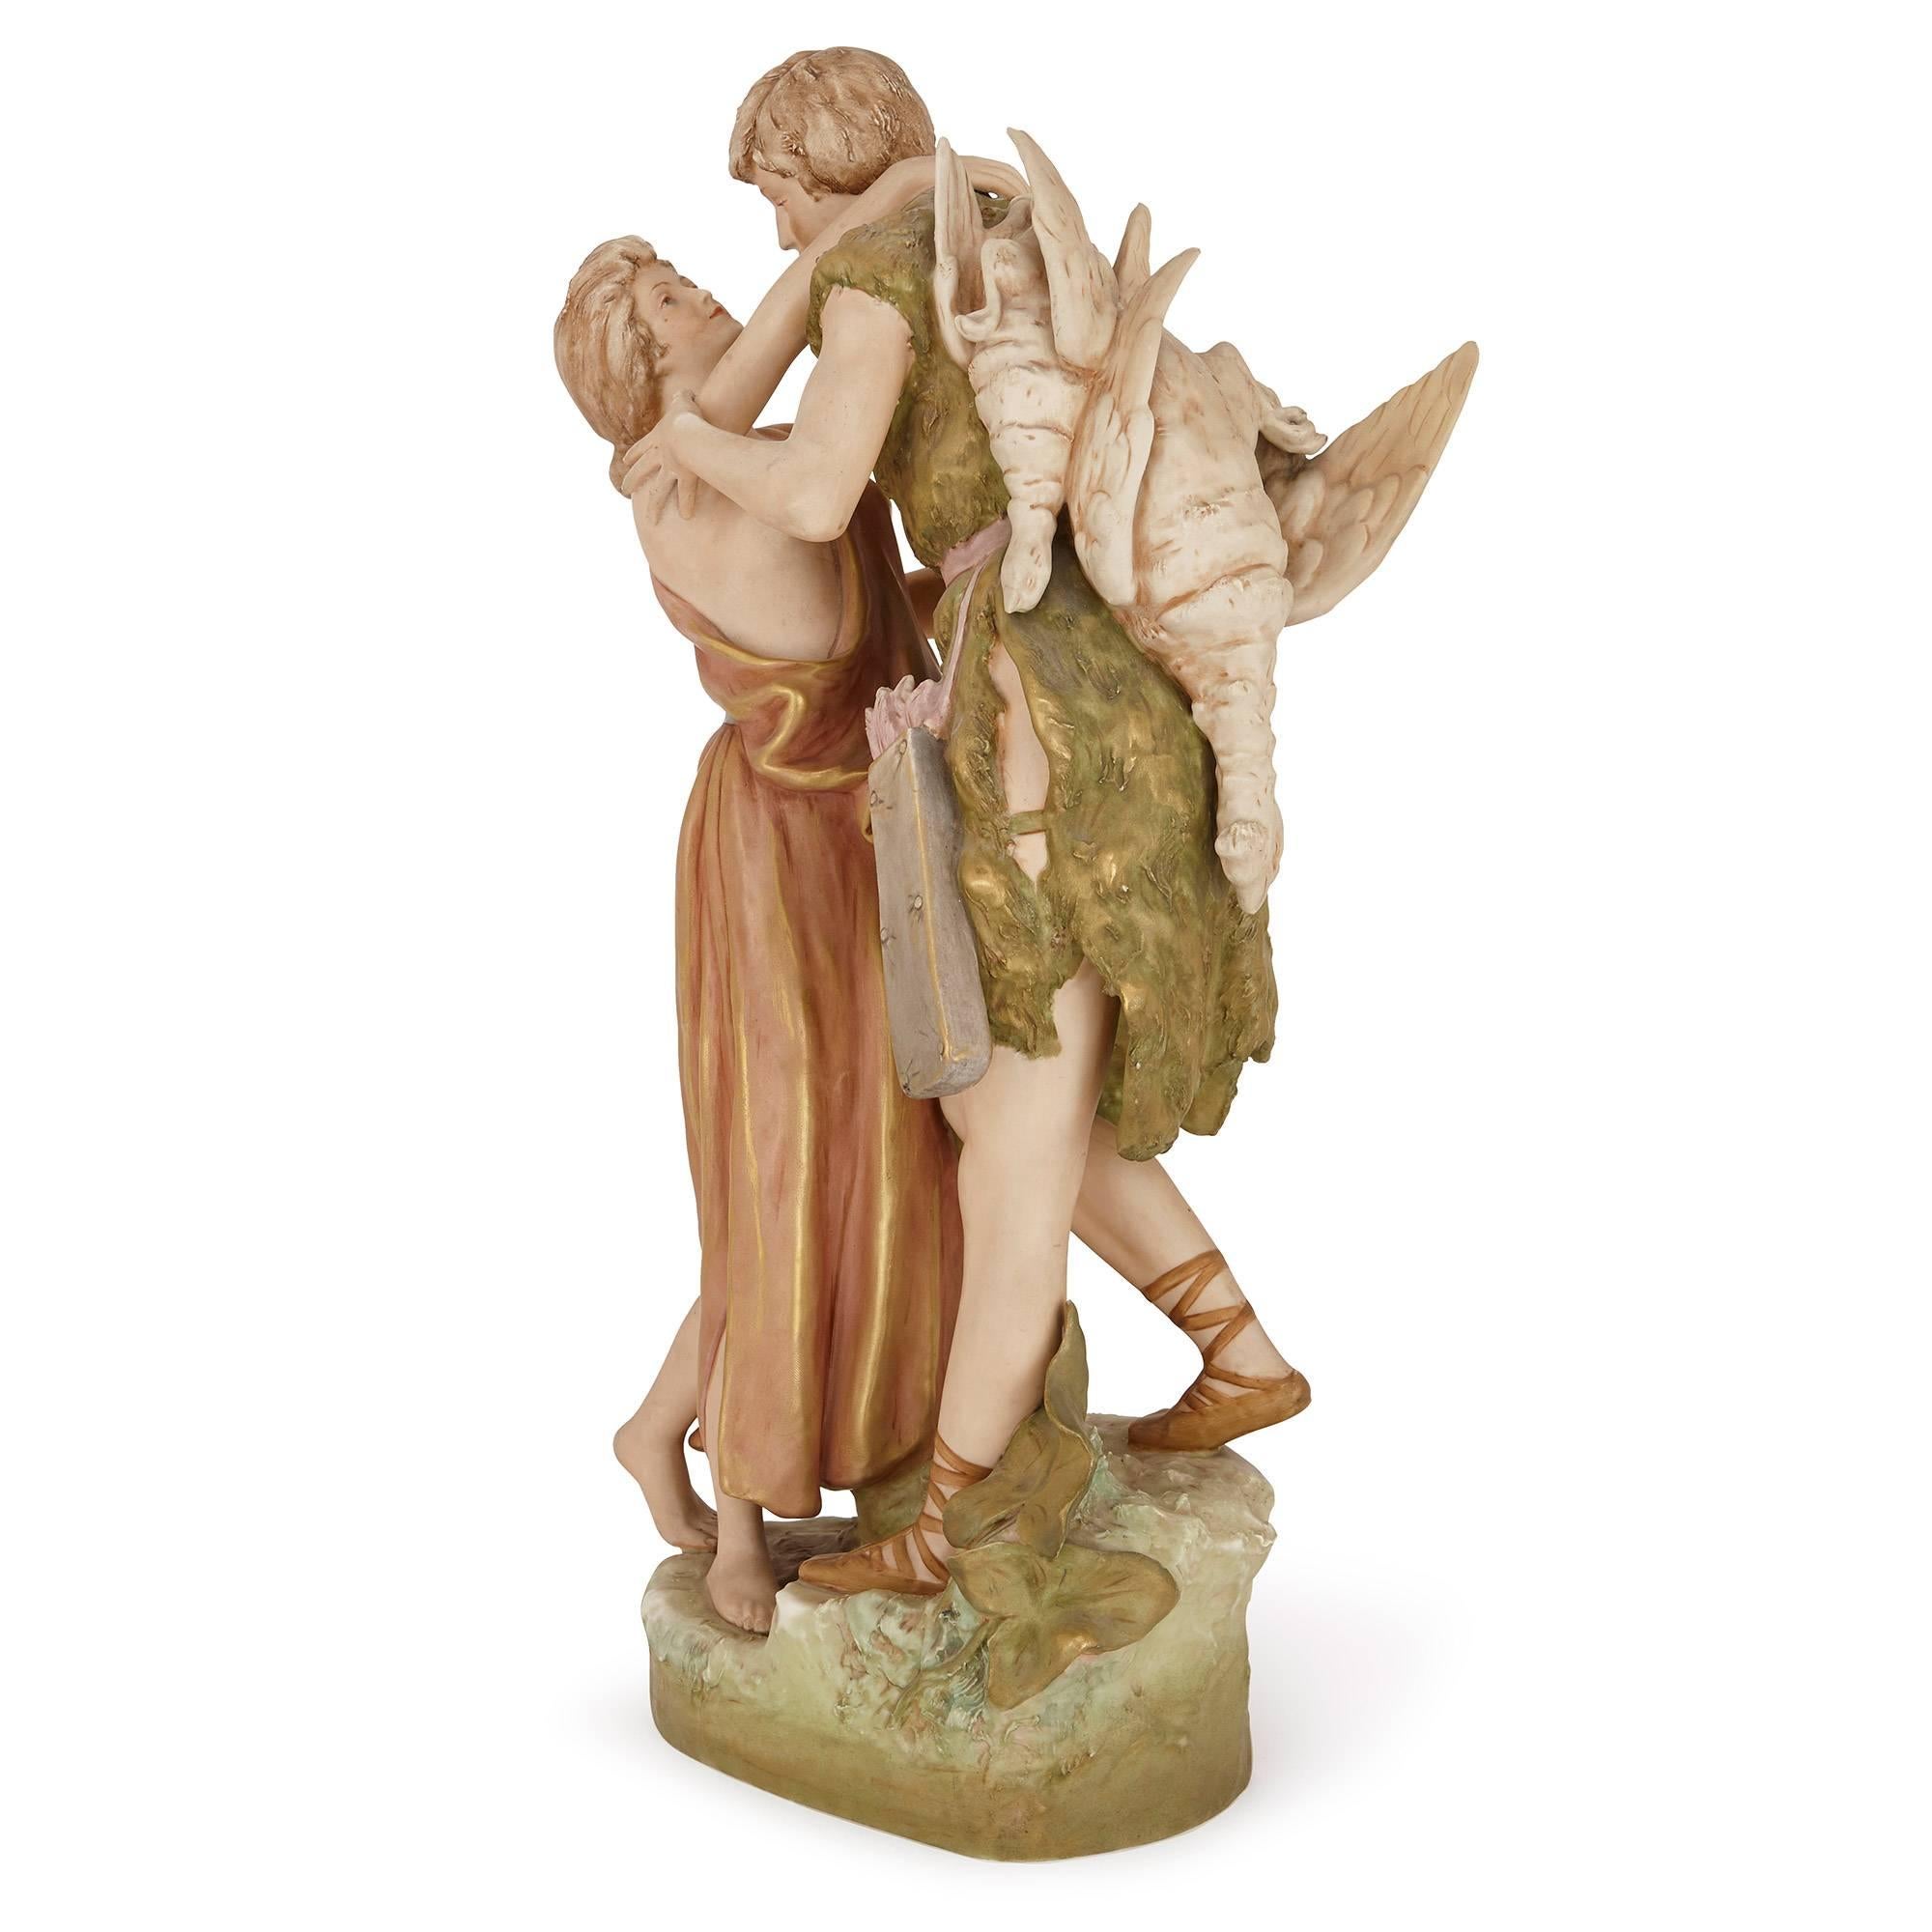 This delicate porcelain figural group depicts two lovers in a tender embrace. The maiden is fair haired and wears a dress which has fallen from her breast, and the hunter has two birds, the spoils of his hunt, across his back and a quiver of arrows